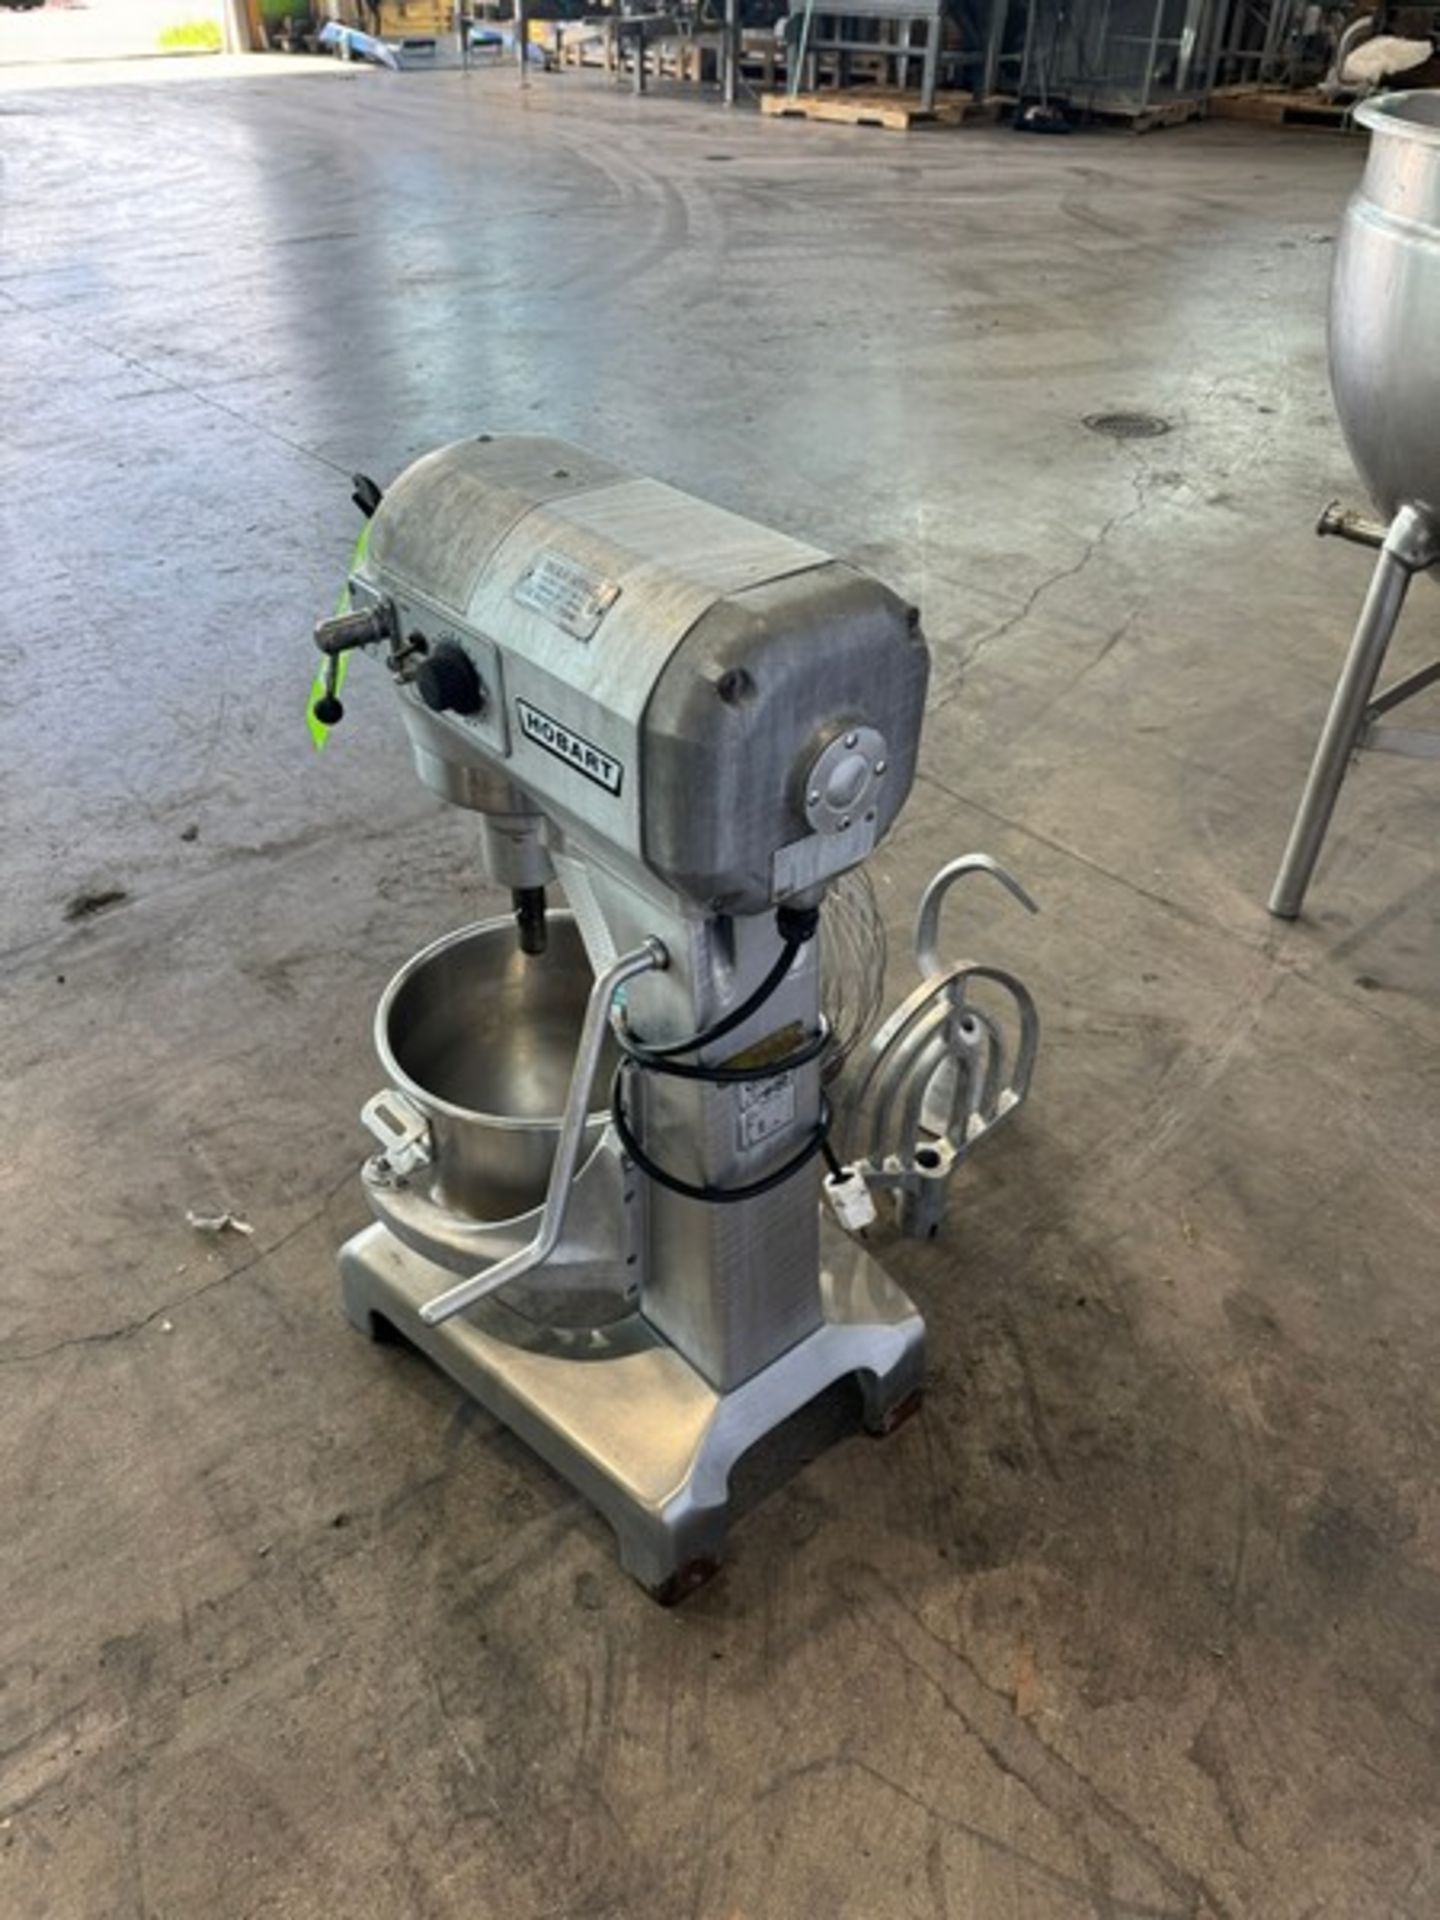 Hobart Mixer, M/N A-200DT, S/N 11-413-046, 115 Volts, 1725 RPM, with S/S Mixing Bowl, Whip, & - Image 4 of 6